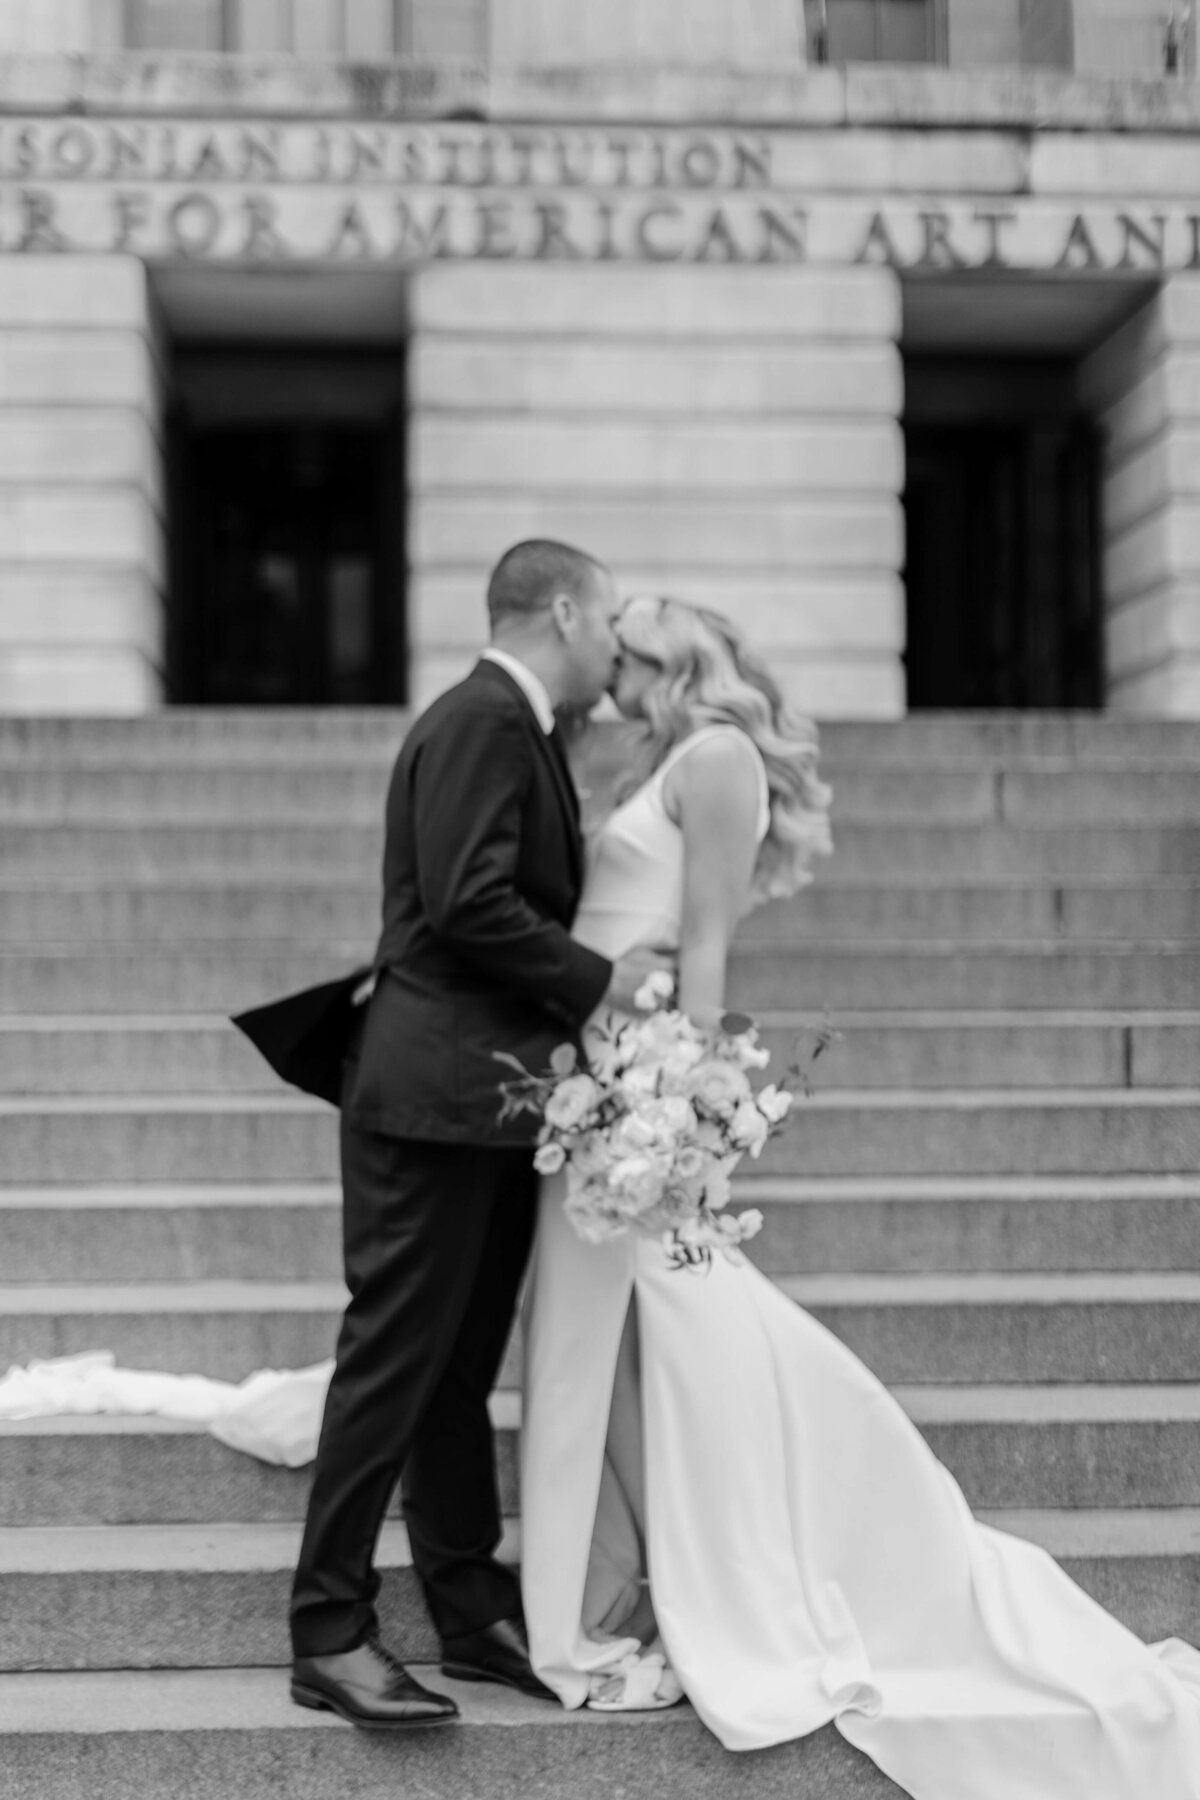 A bride and groom kiss on the stairs of the Smithsonian museum of Art.